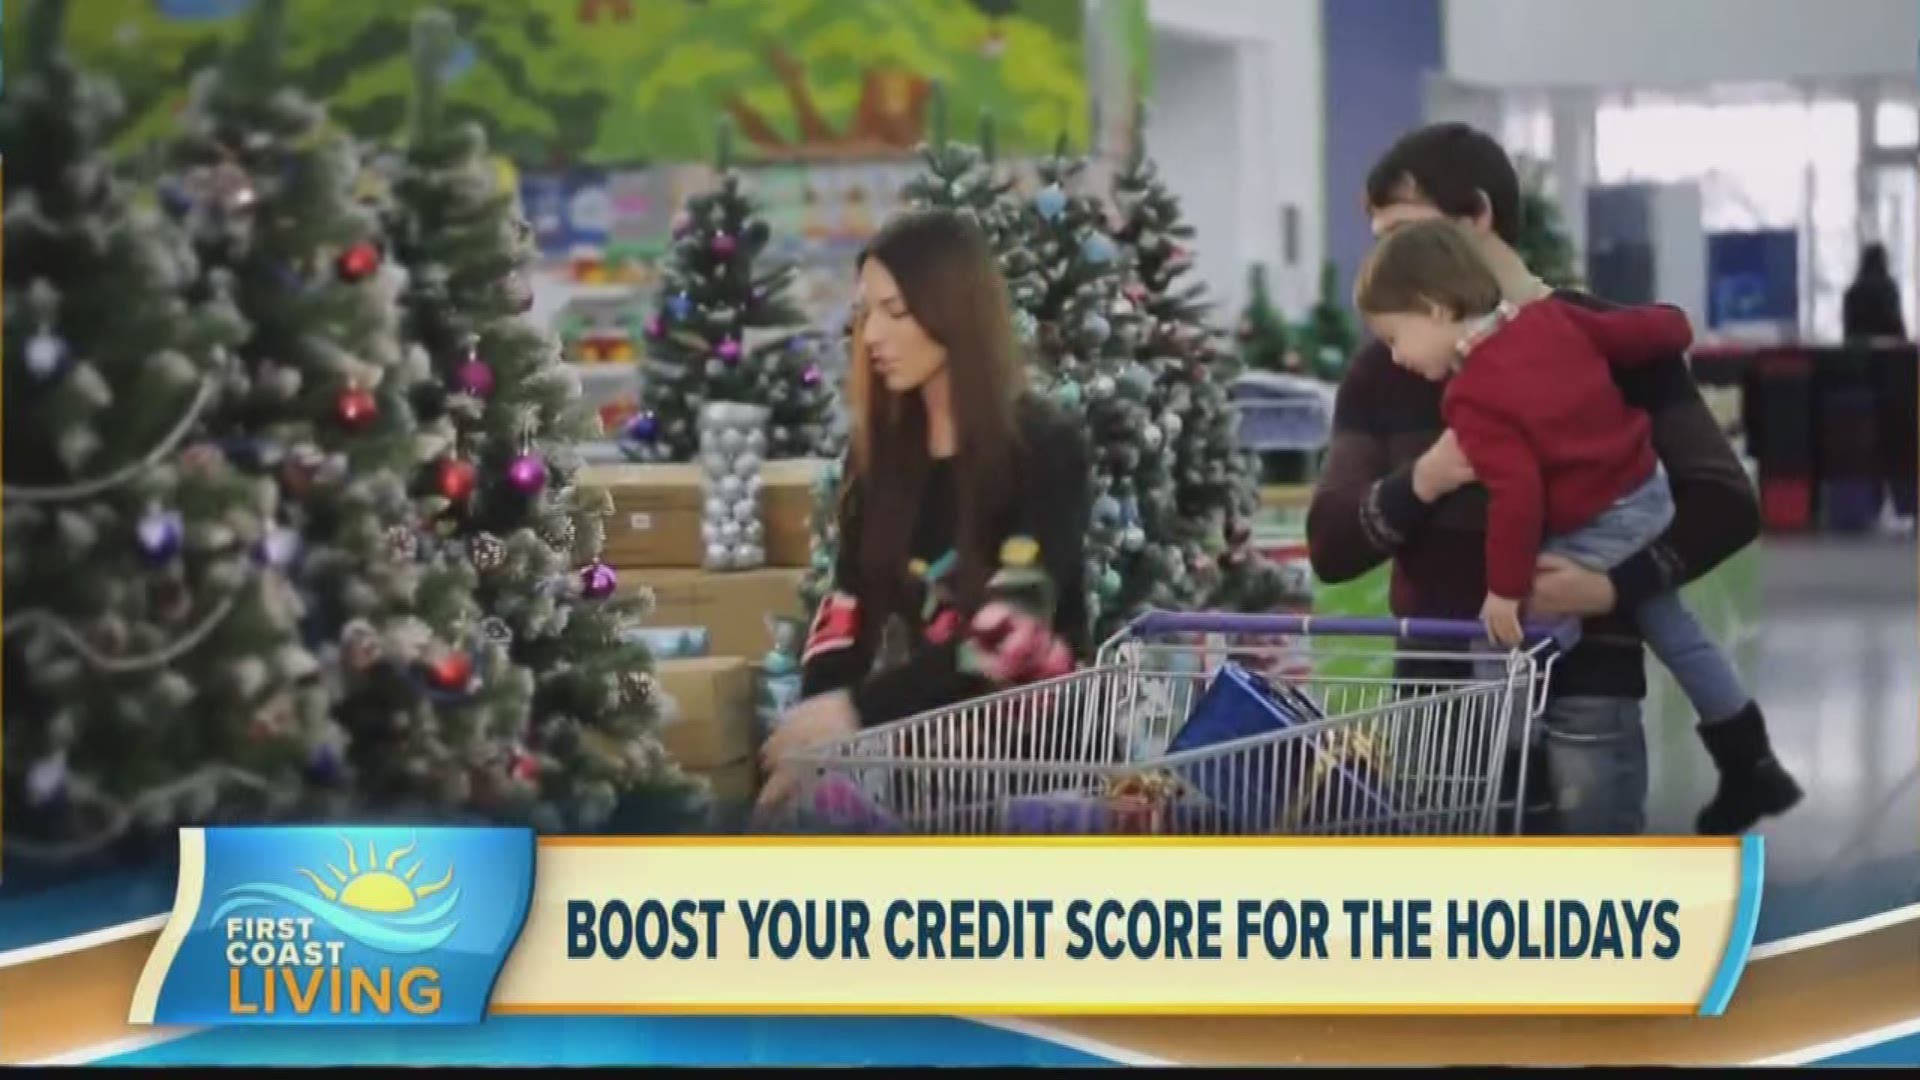 Financial expert shares advice for holiday spending.